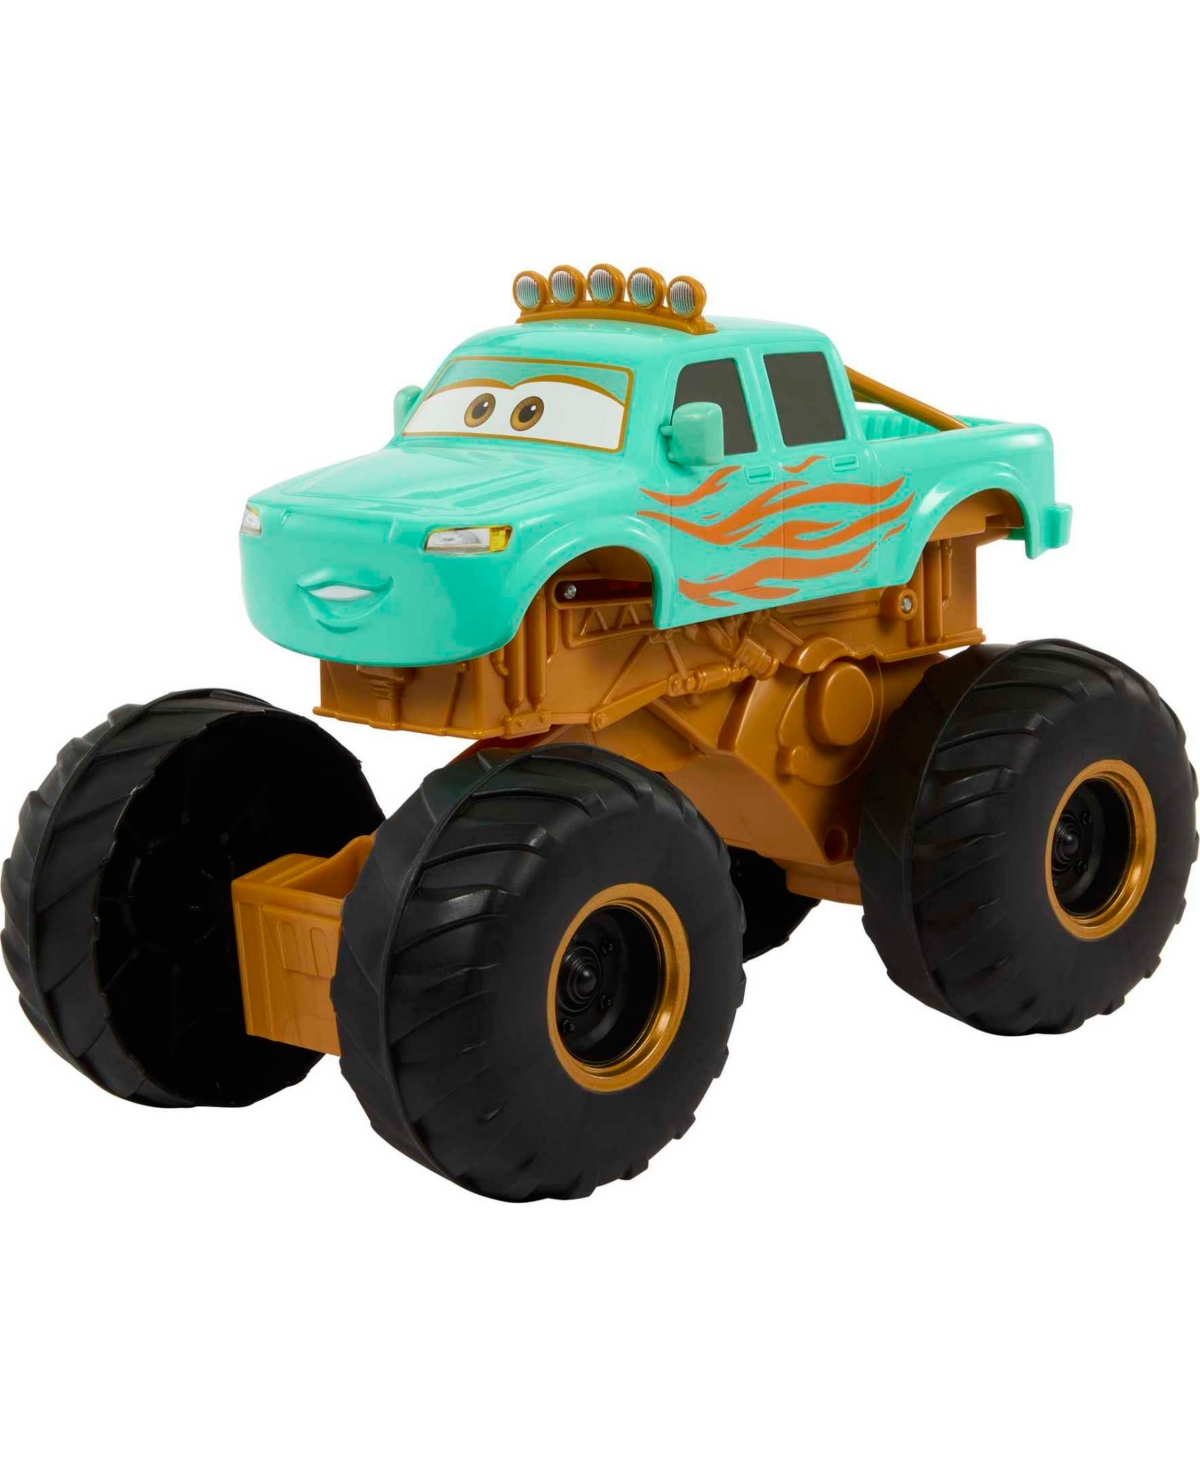 Disney Pixar Babies' 's Cars Toys, Cars On The Road Circus Stunt Ivy Vehicle, Jumping Monster Truck In Multi-color